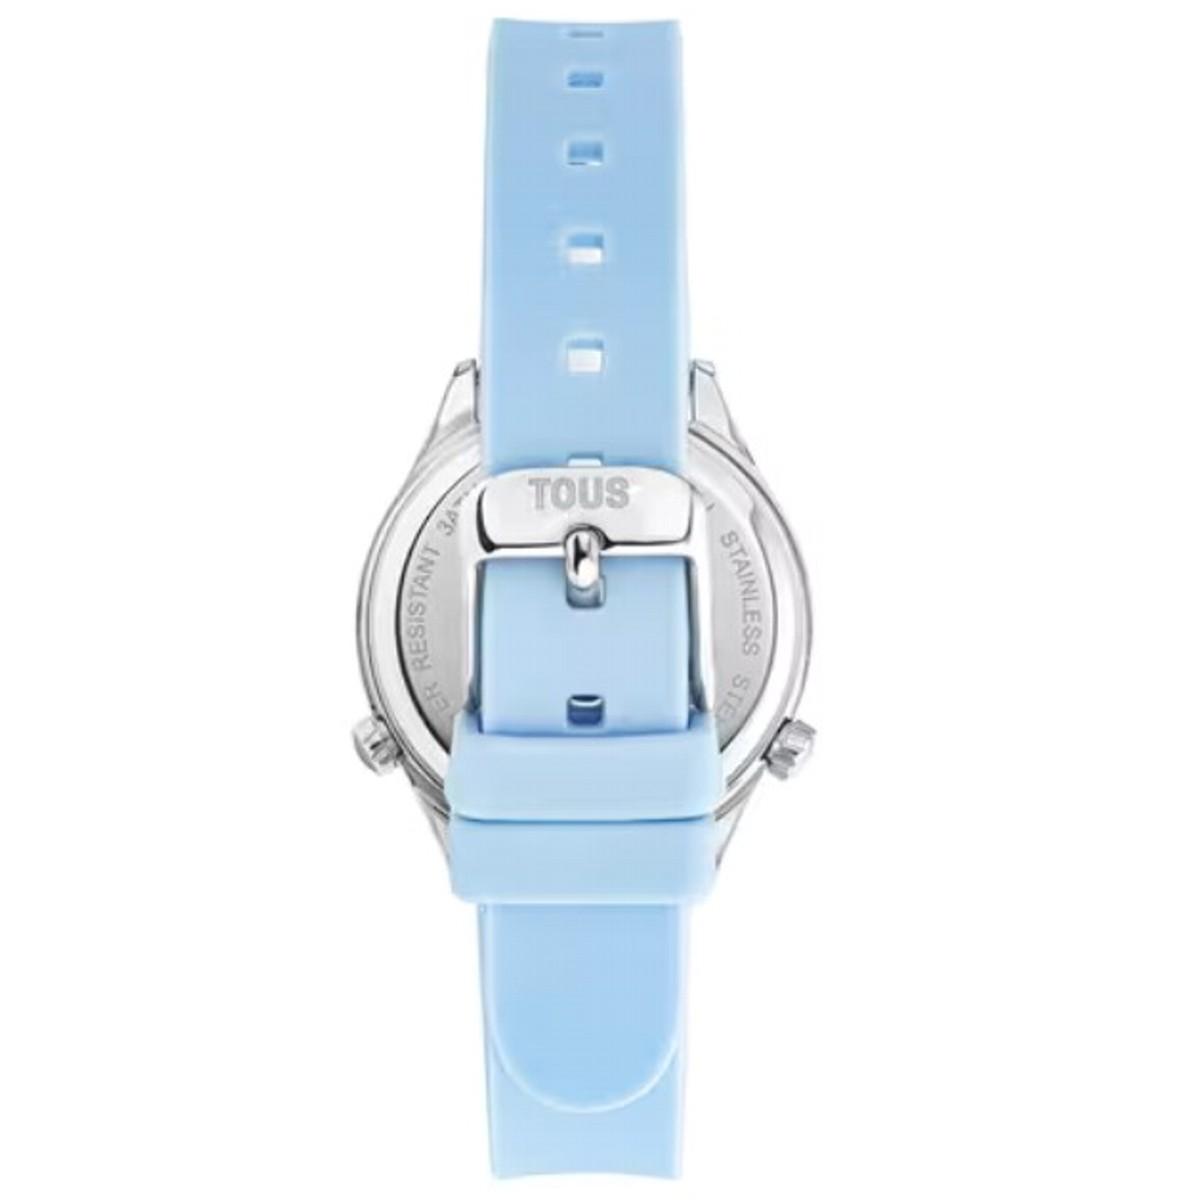 BLUE MINI SELF TIME TOUS WATCH FOR KIDS 200358052